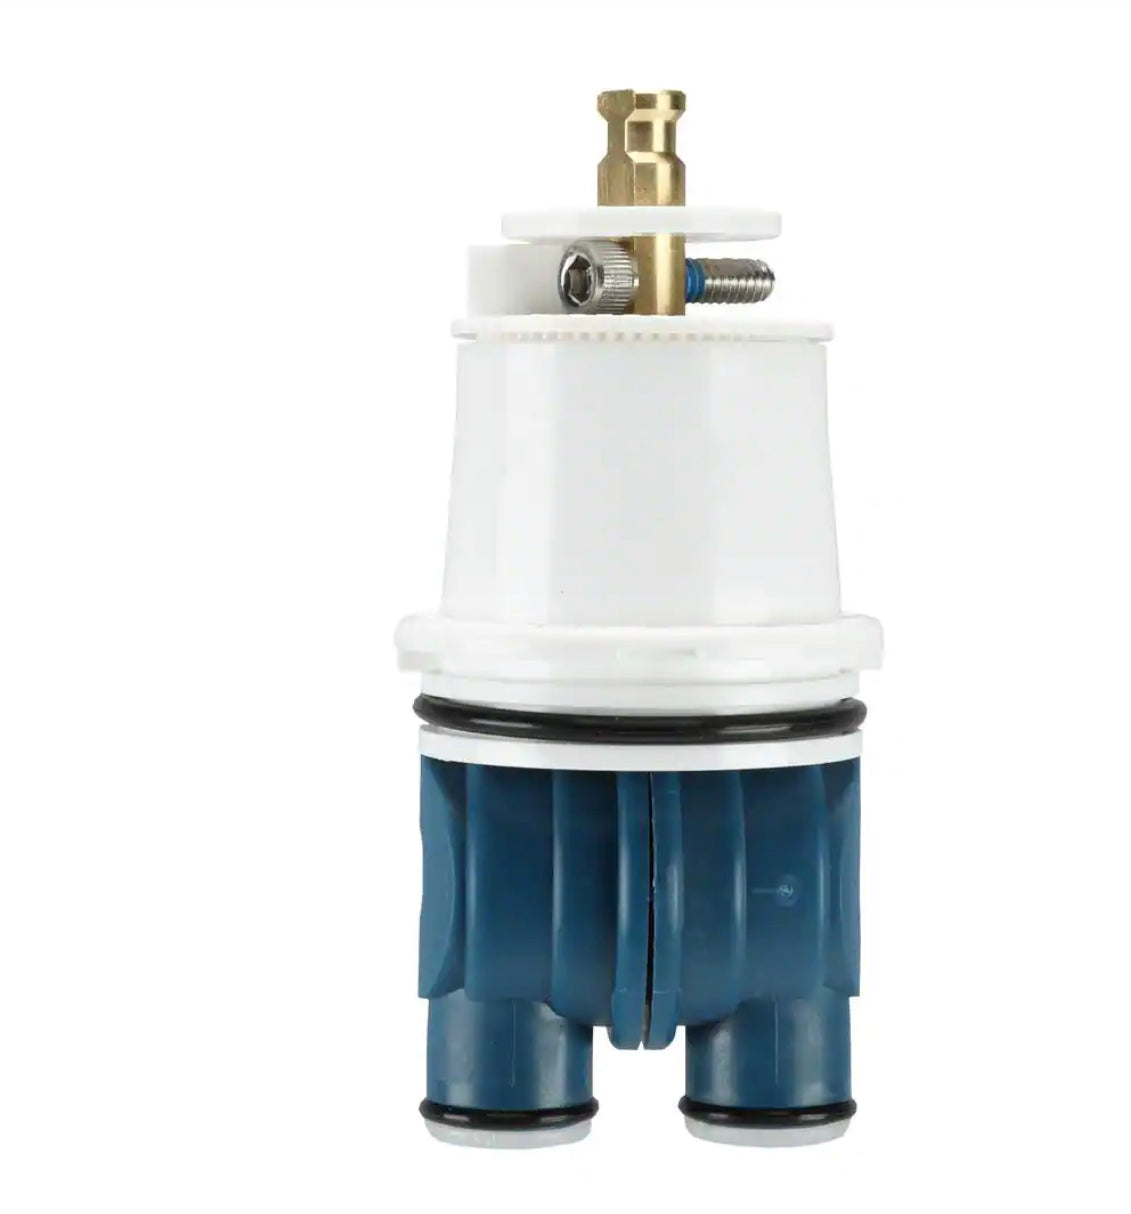 Danco 1.91 in Replacement Cartridge for Delta Monitor Faucet Damaged Box